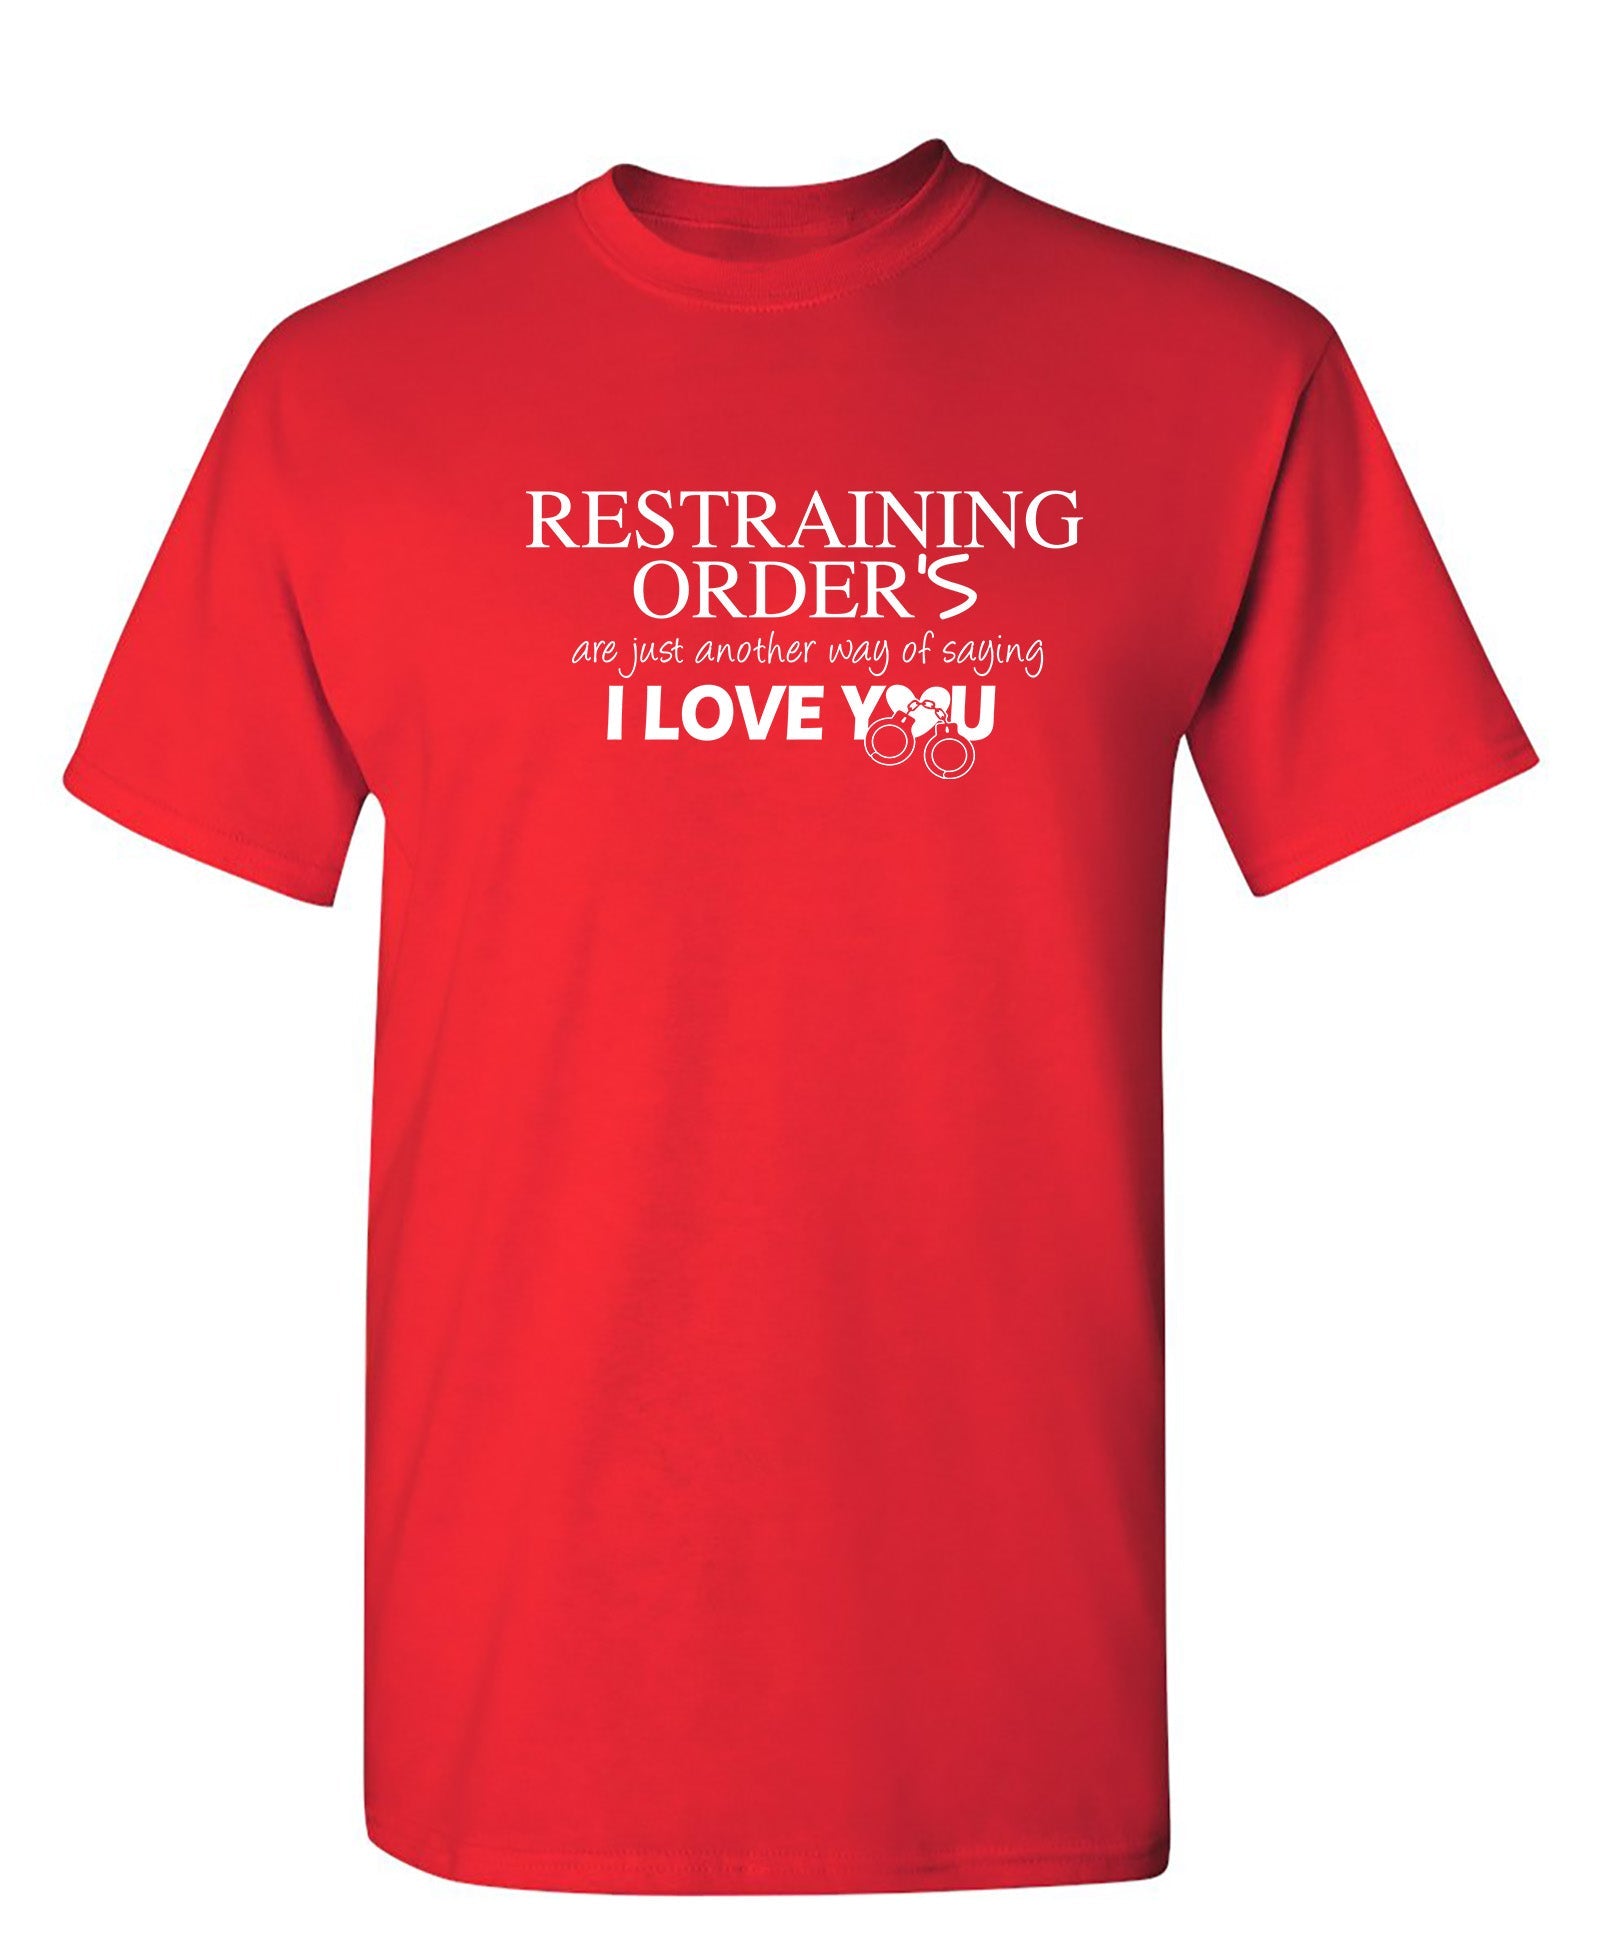 RESTRAINING - Funny T Shirts & Graphic Tees